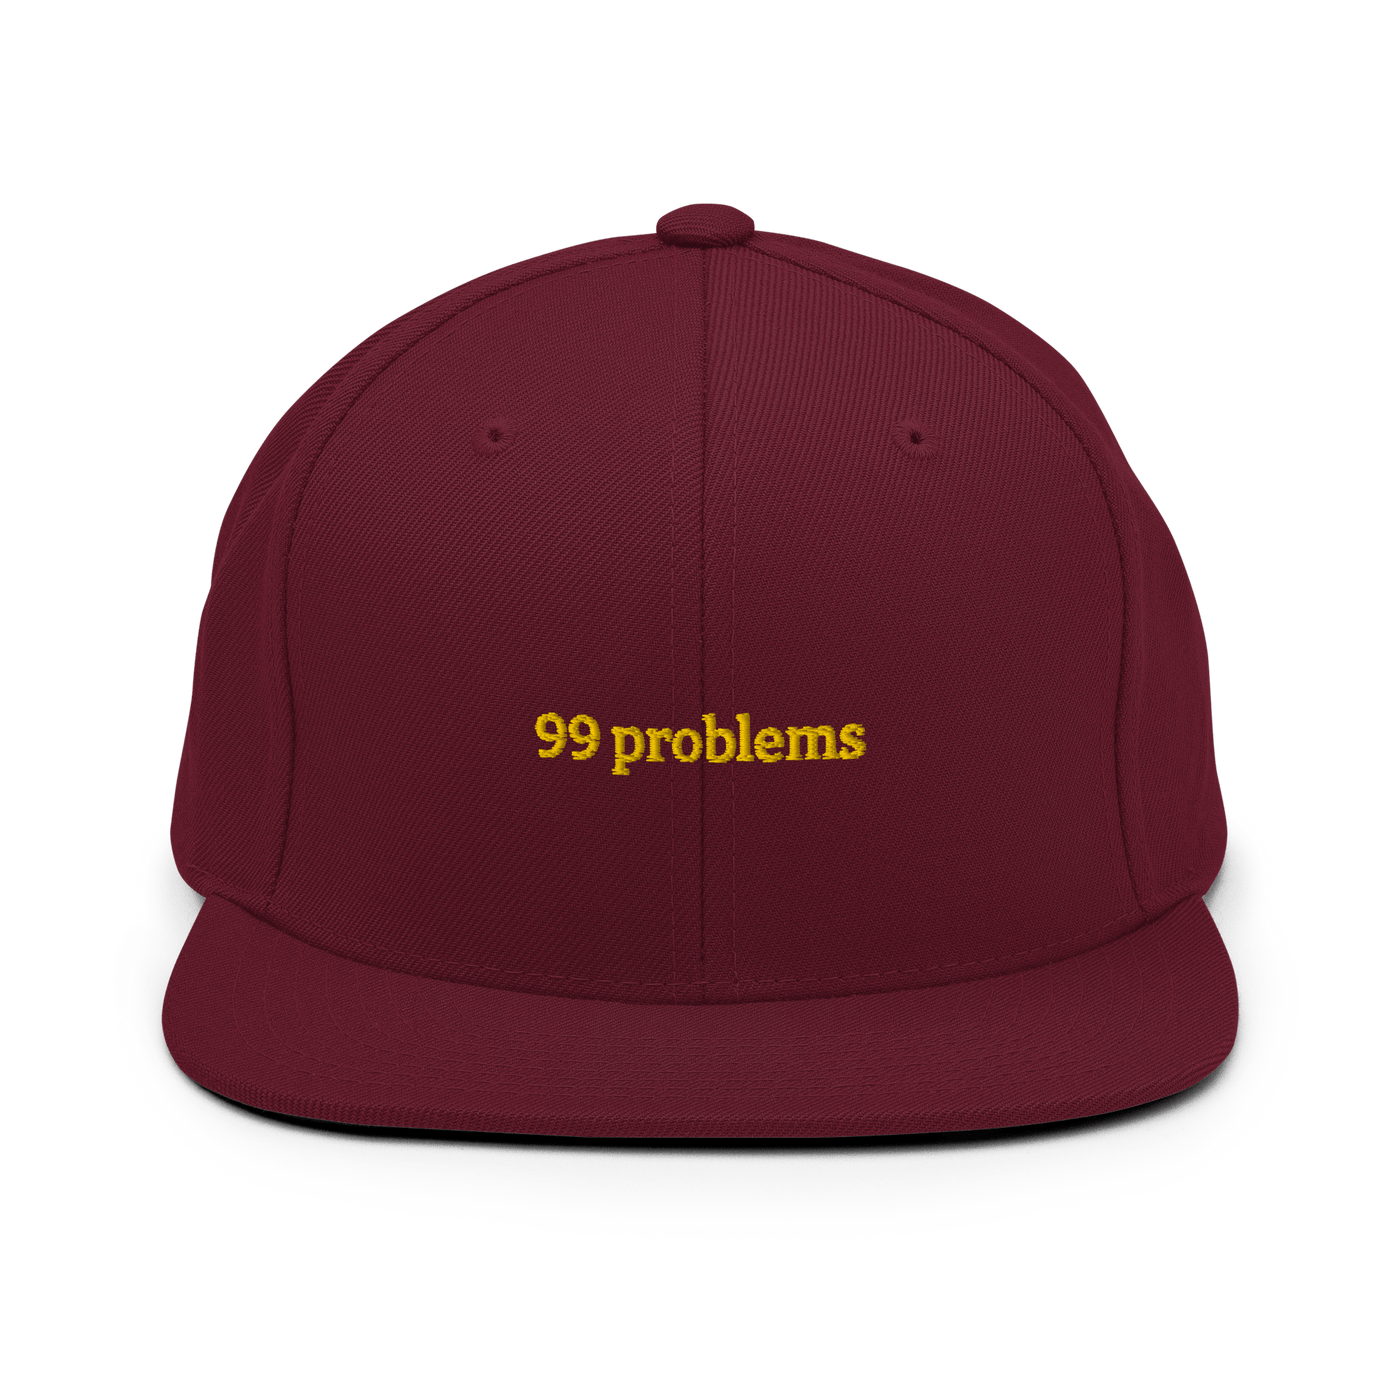 99 problems Snapback - Maroon - - Just Another Cap Store